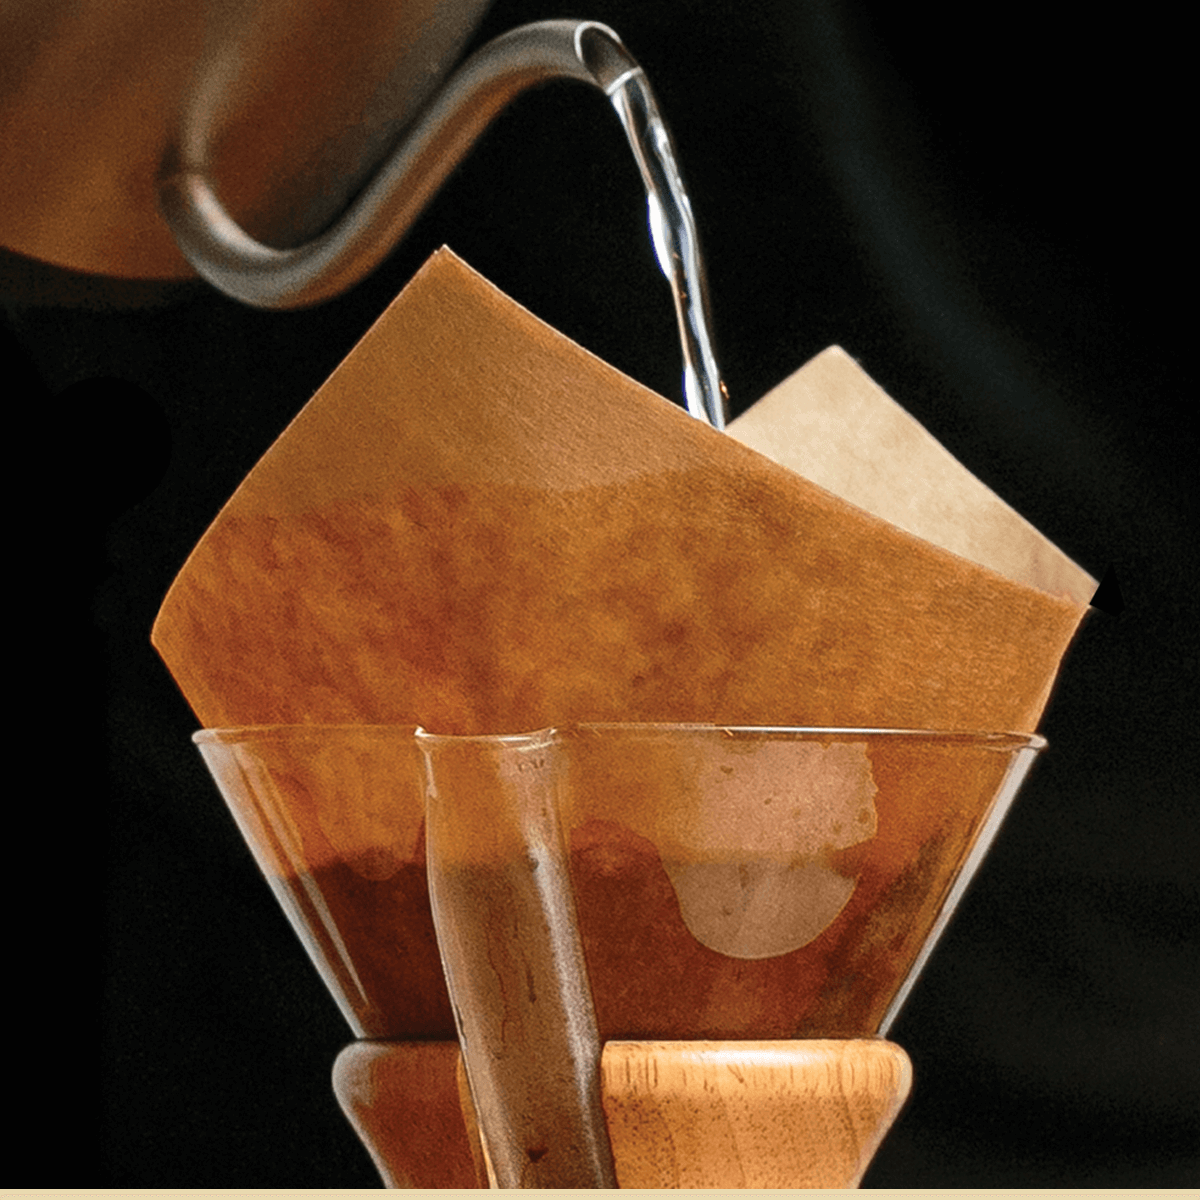 Chemex Bonded Natural Filters Squares, pack of 100